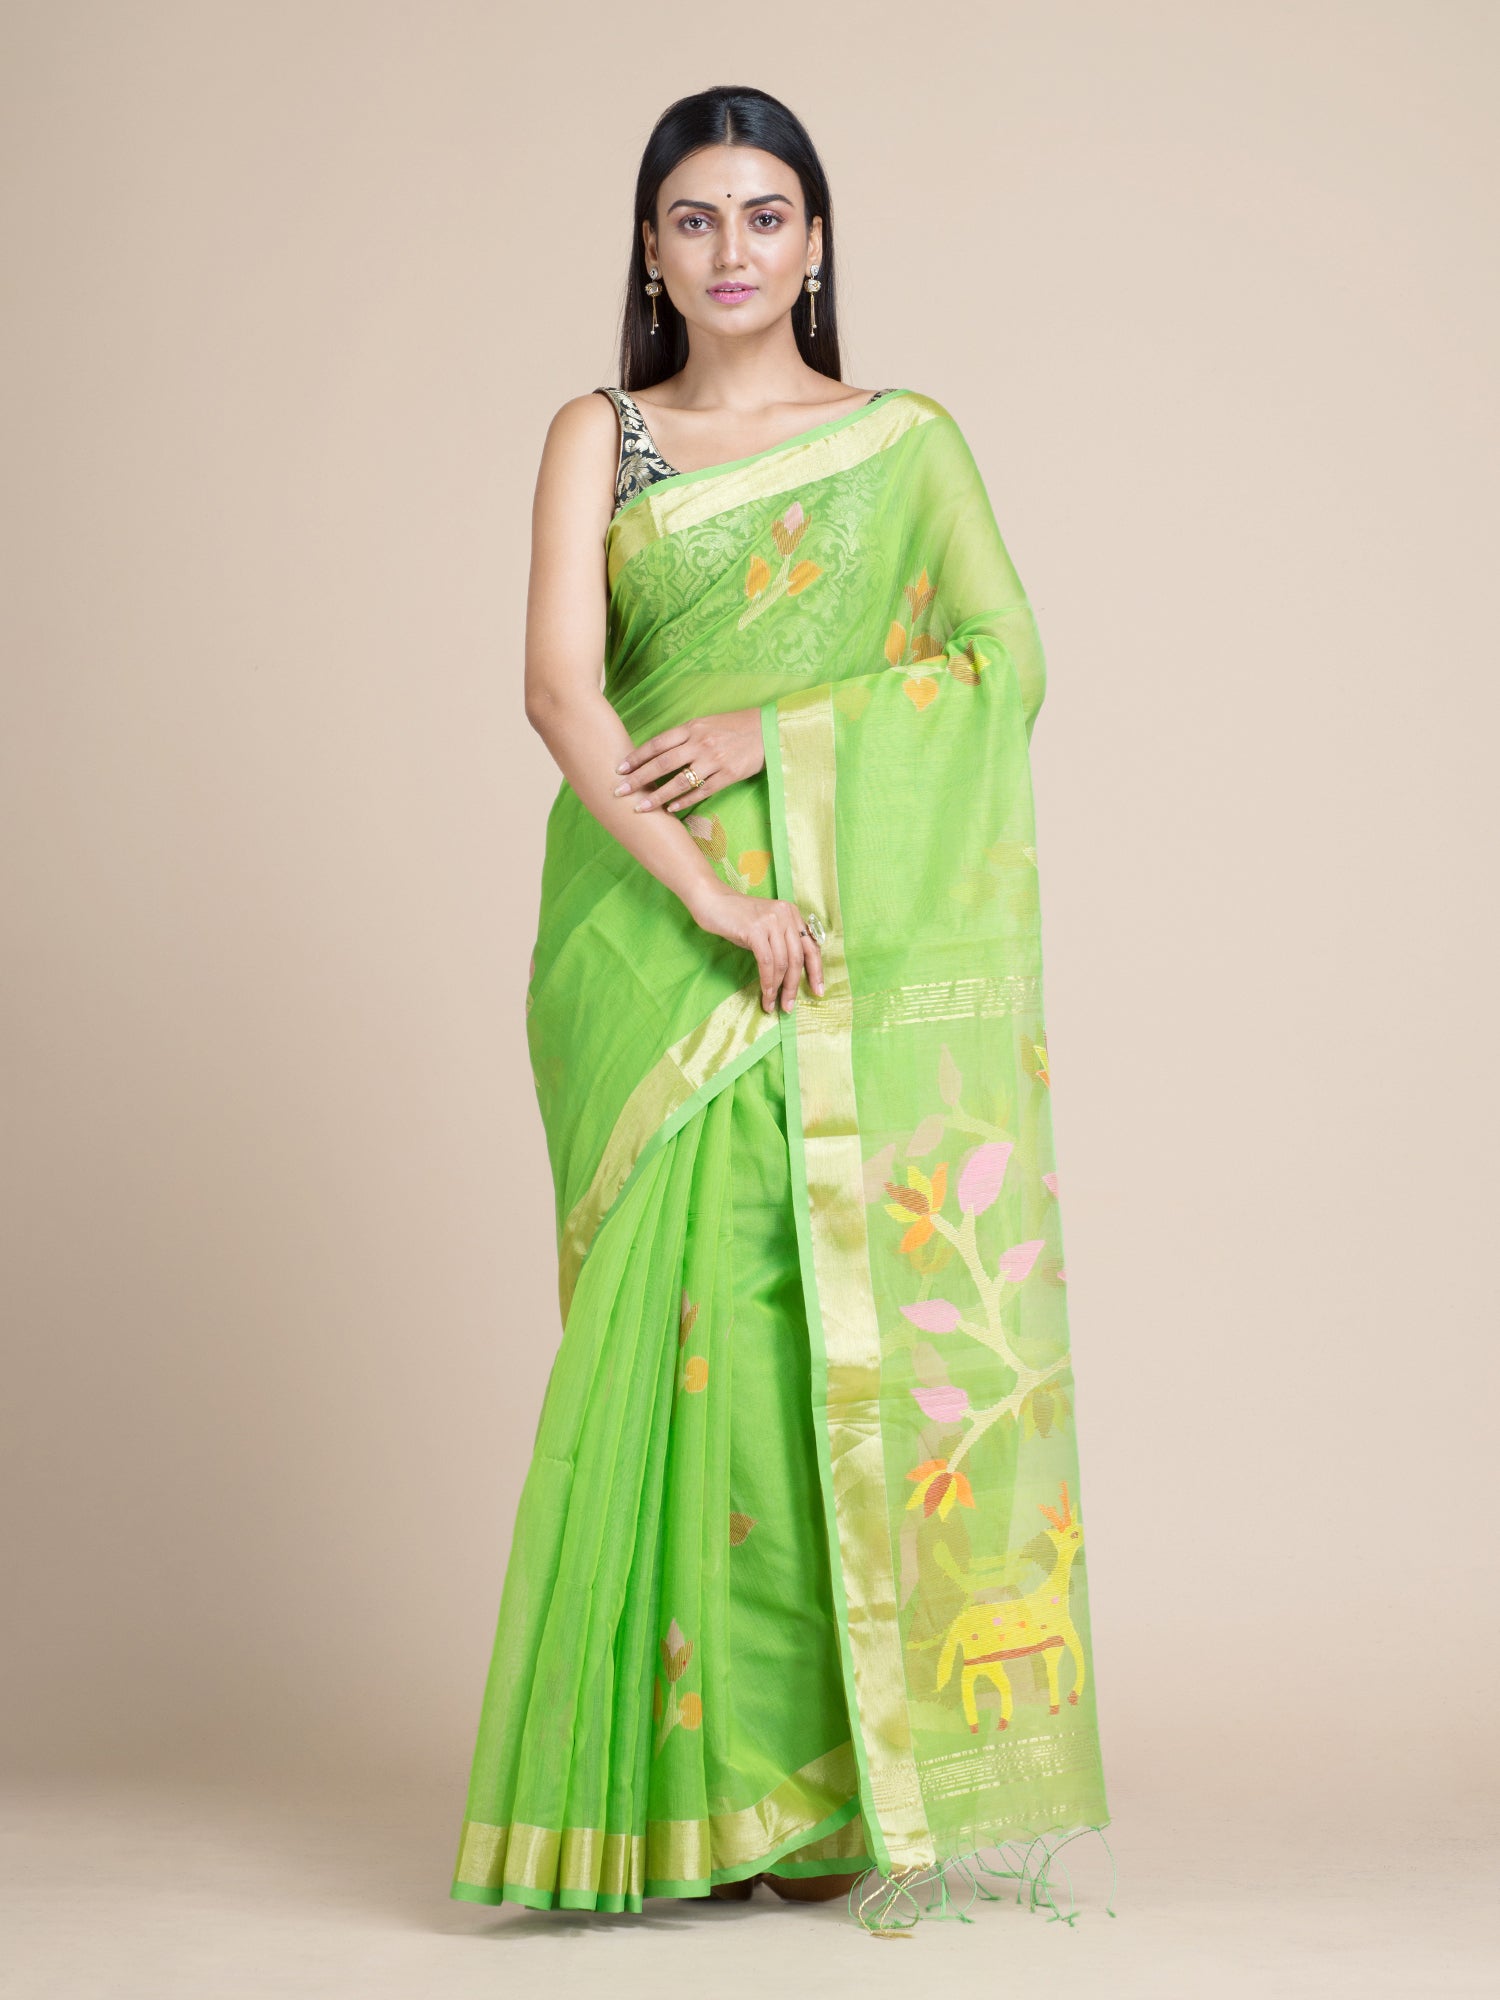 Women's Light Green Blended Cotton Saree With Woven Scenery Pallu And Unstitched Blouse-Sajasajo